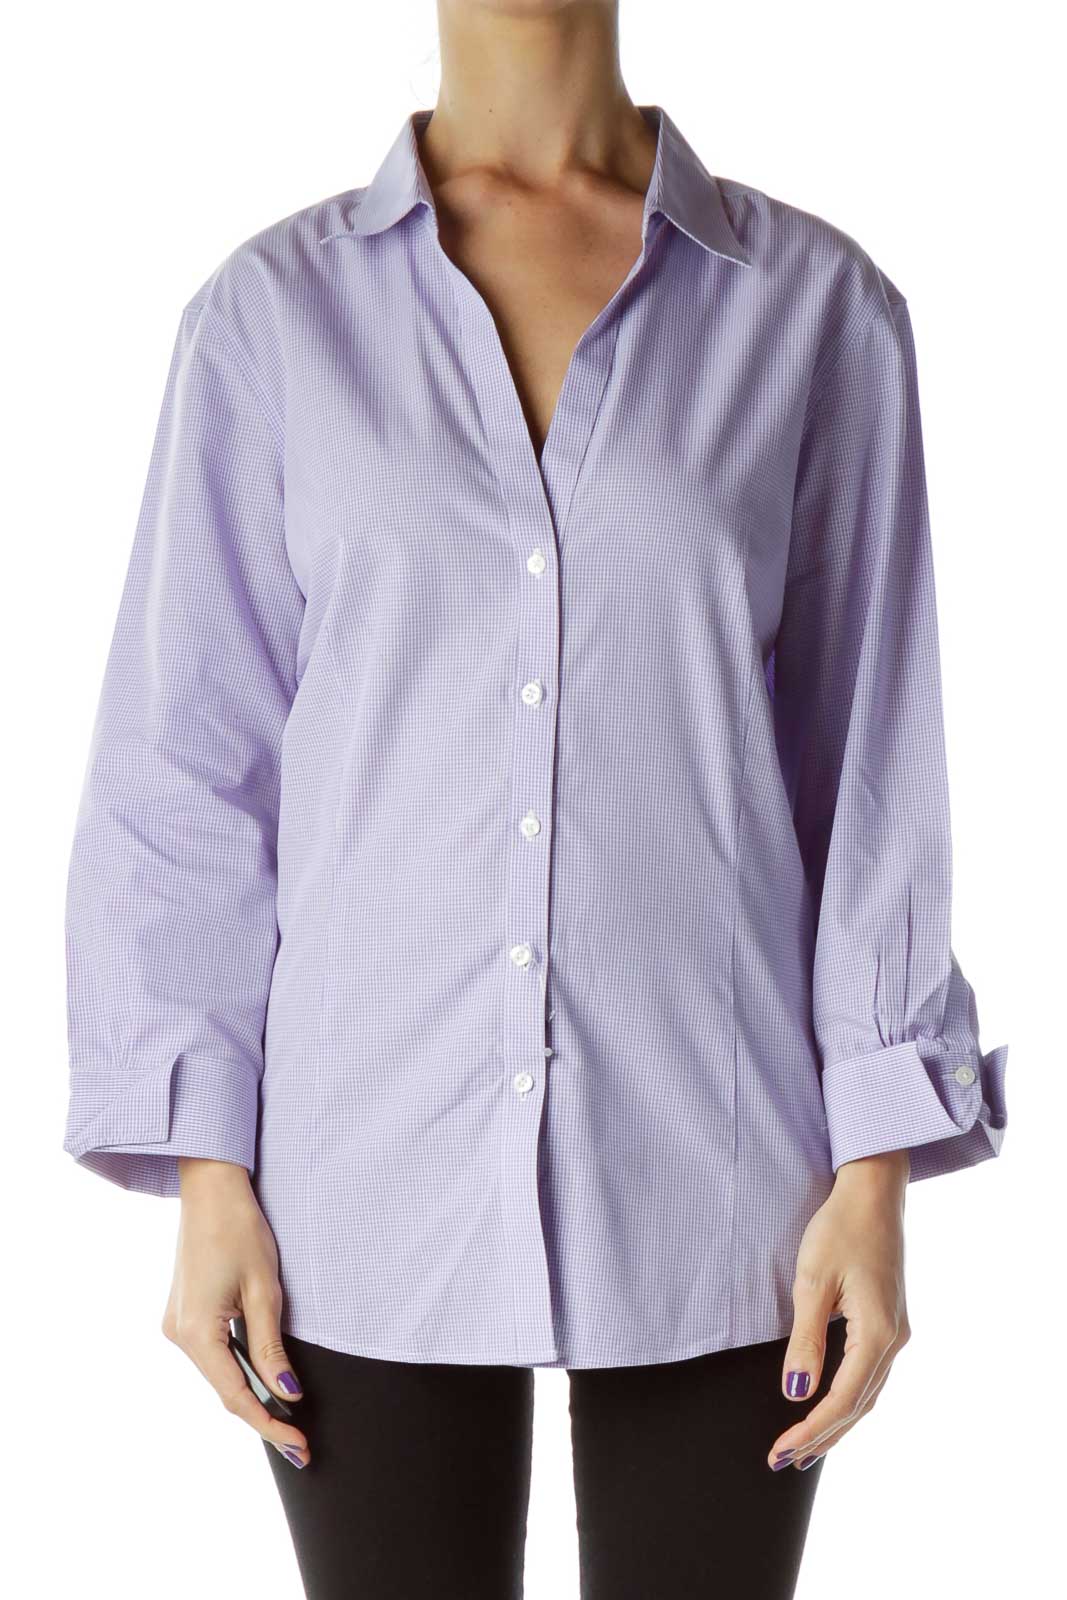 Purple Check 3/4 Sleeve Collared Shirt Front